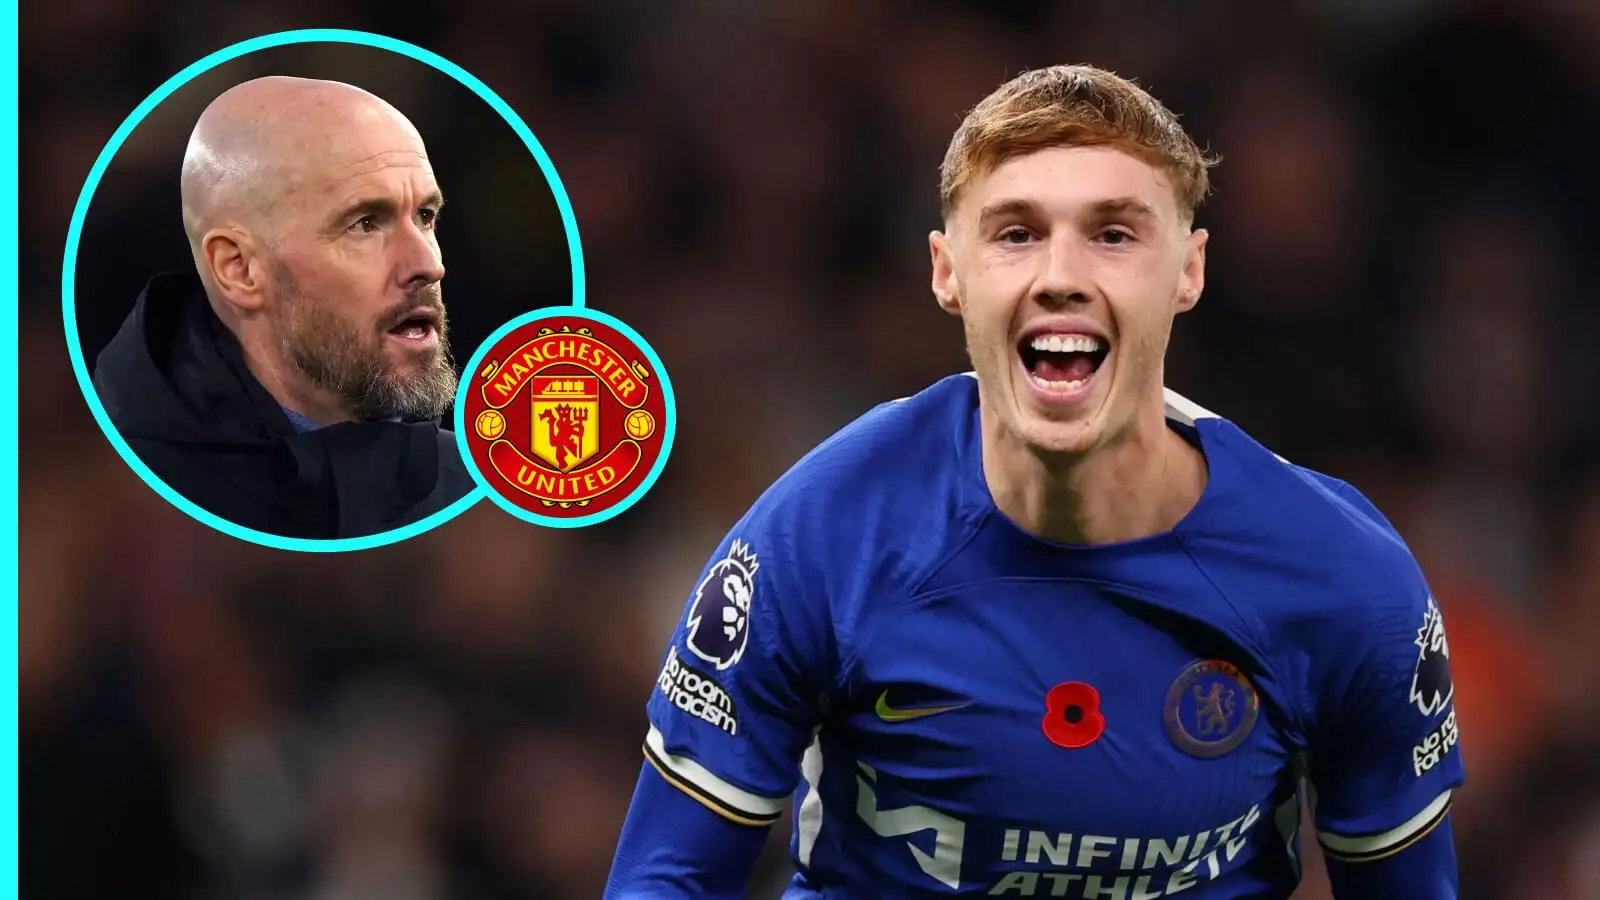 Erik ten Hag, Chelsea forward Cole Palmer and also the Manchester United badge